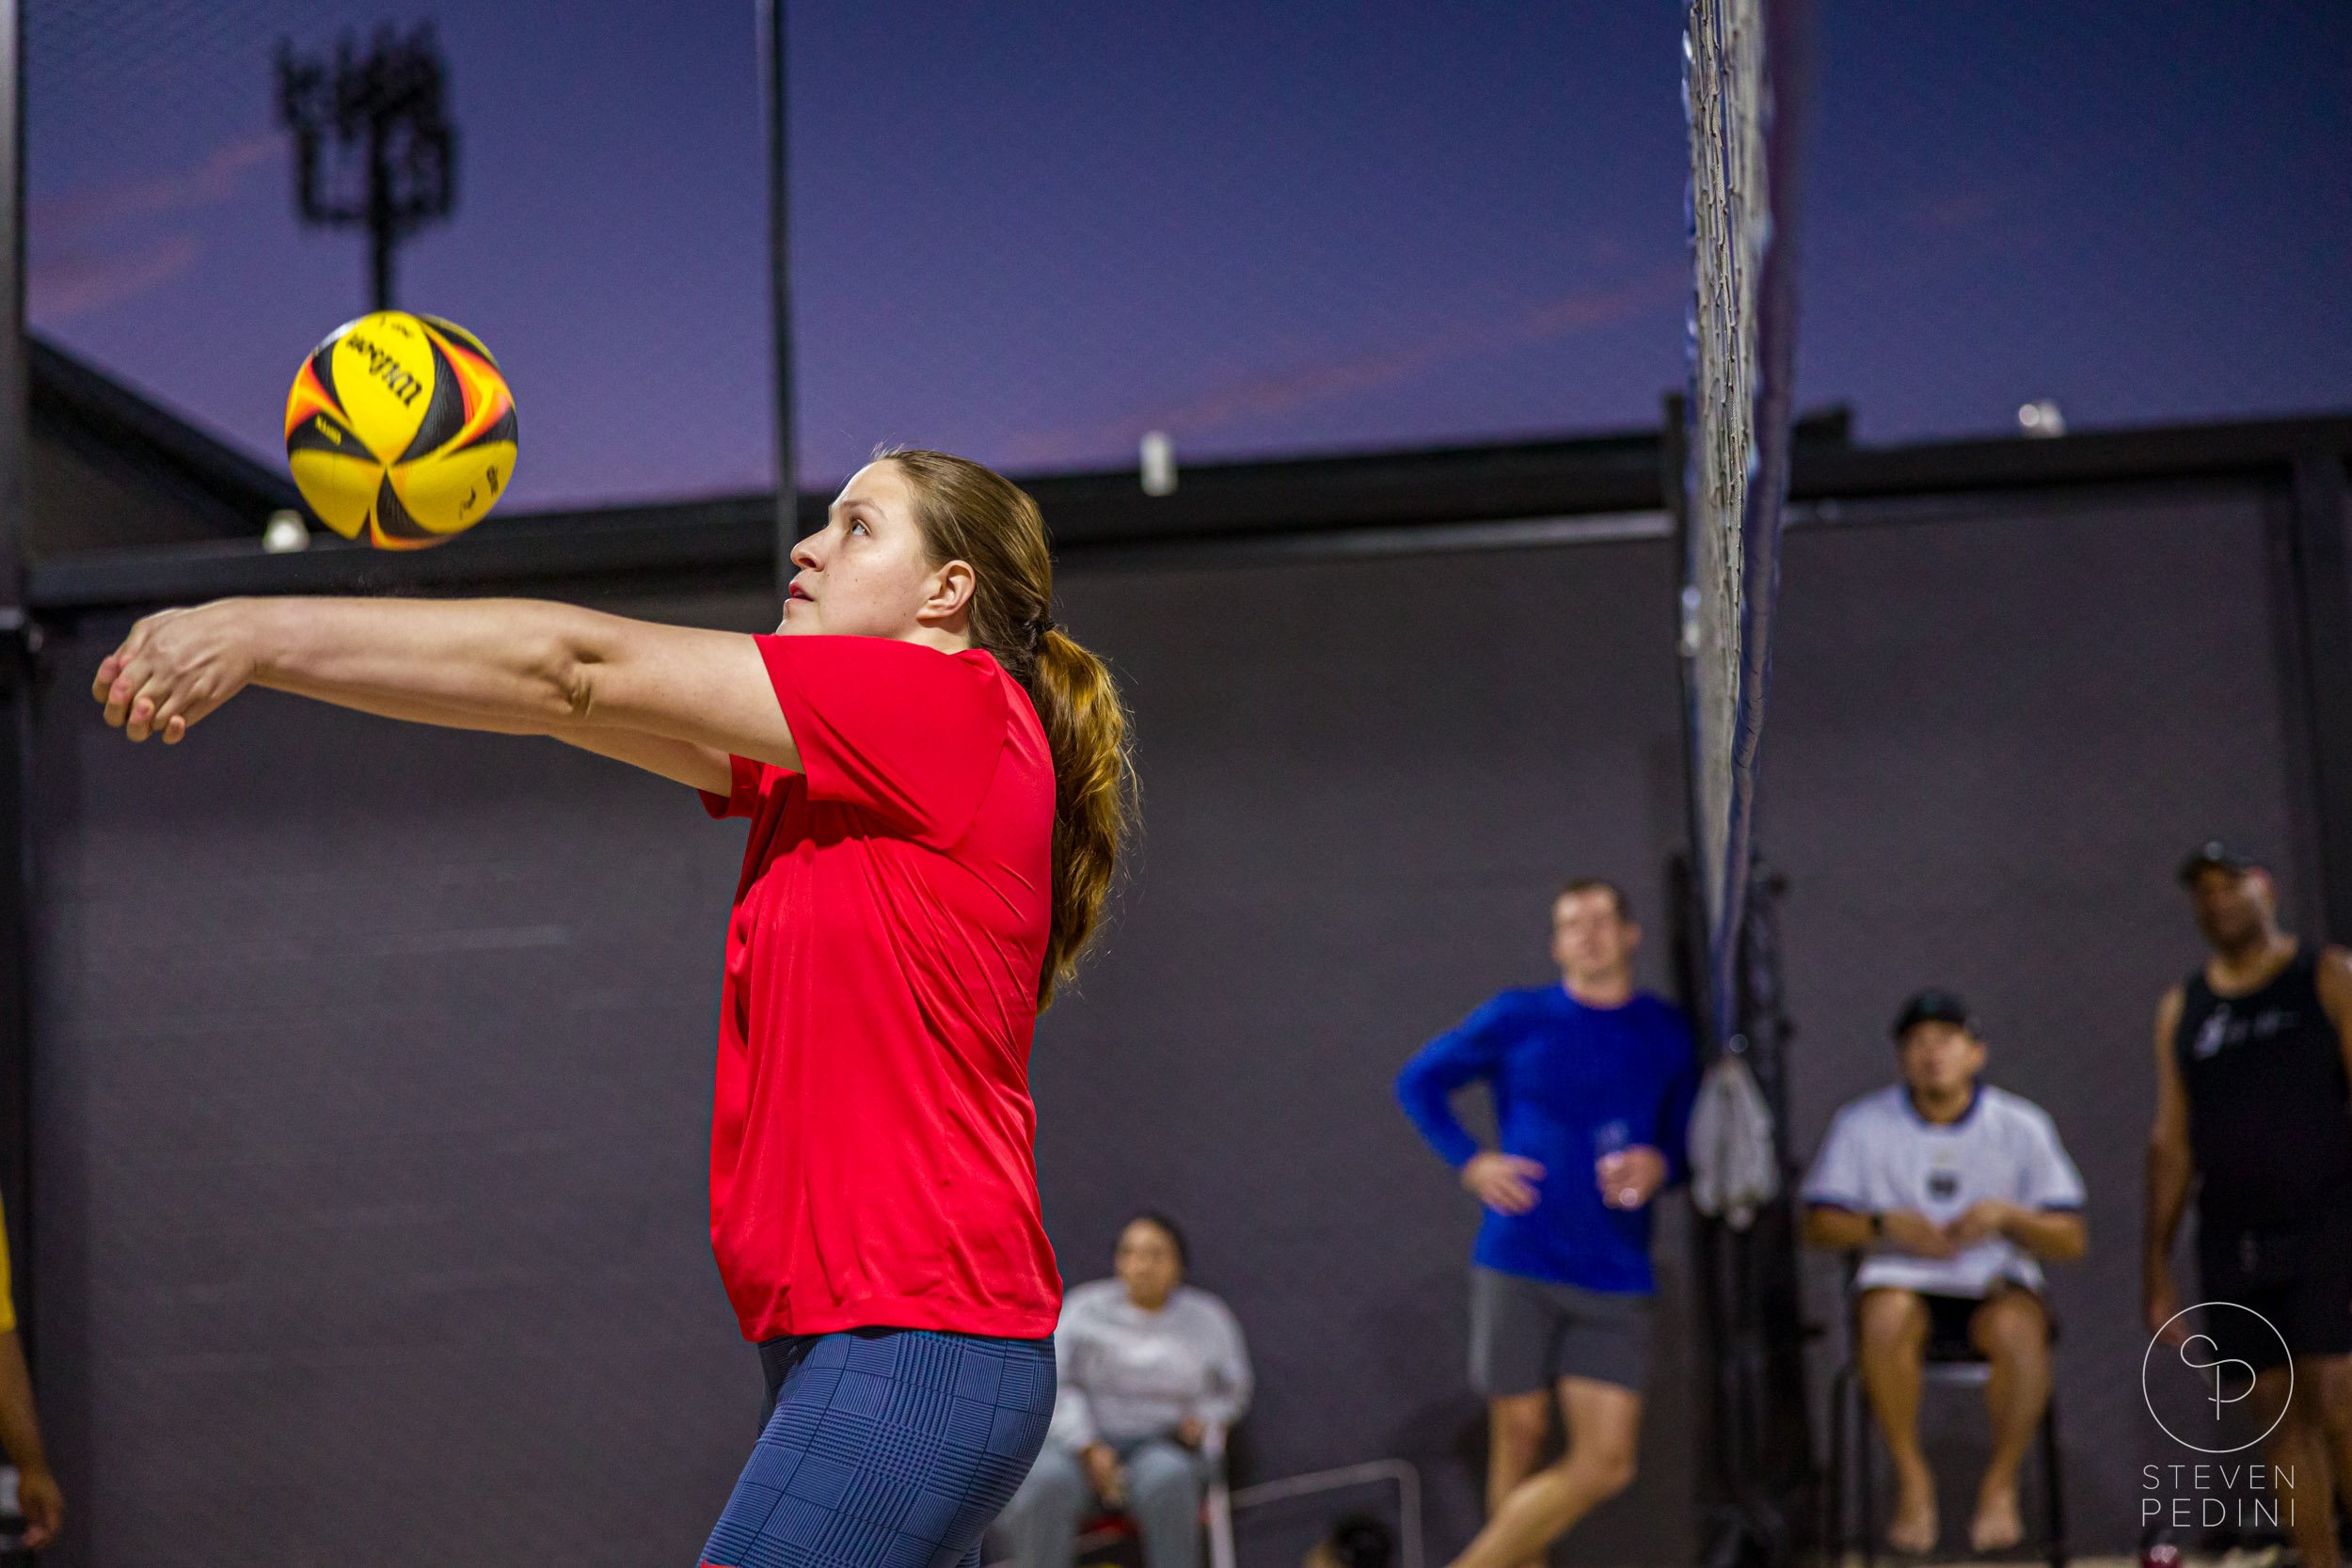 Steven Pedini Photography - Bumpy Pickle - Sand Volleyball - Houston TX - World Cup of Volleyball - 00324.jpg